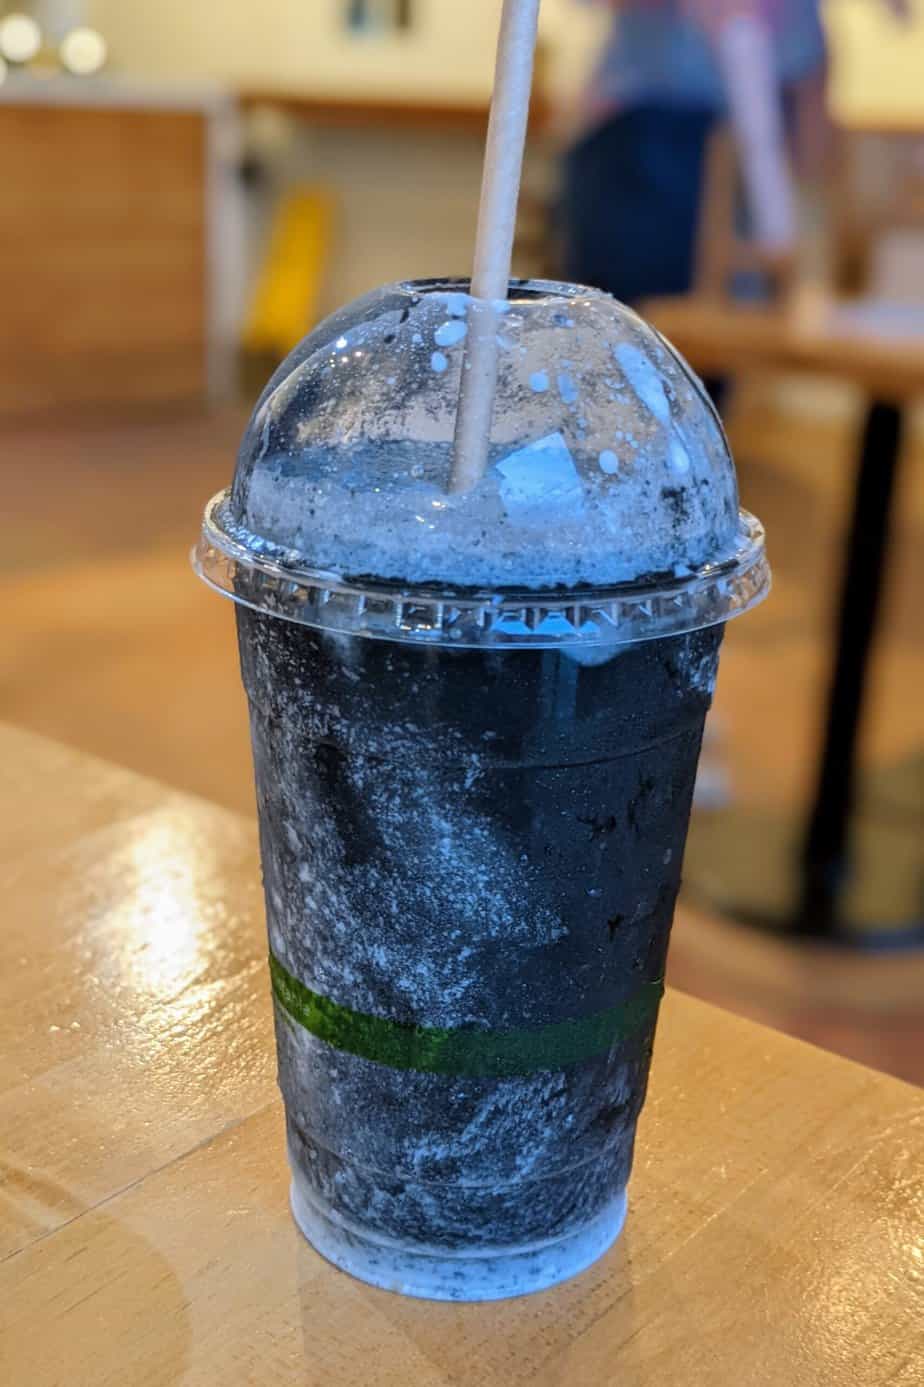 Black Charcoal smoothie